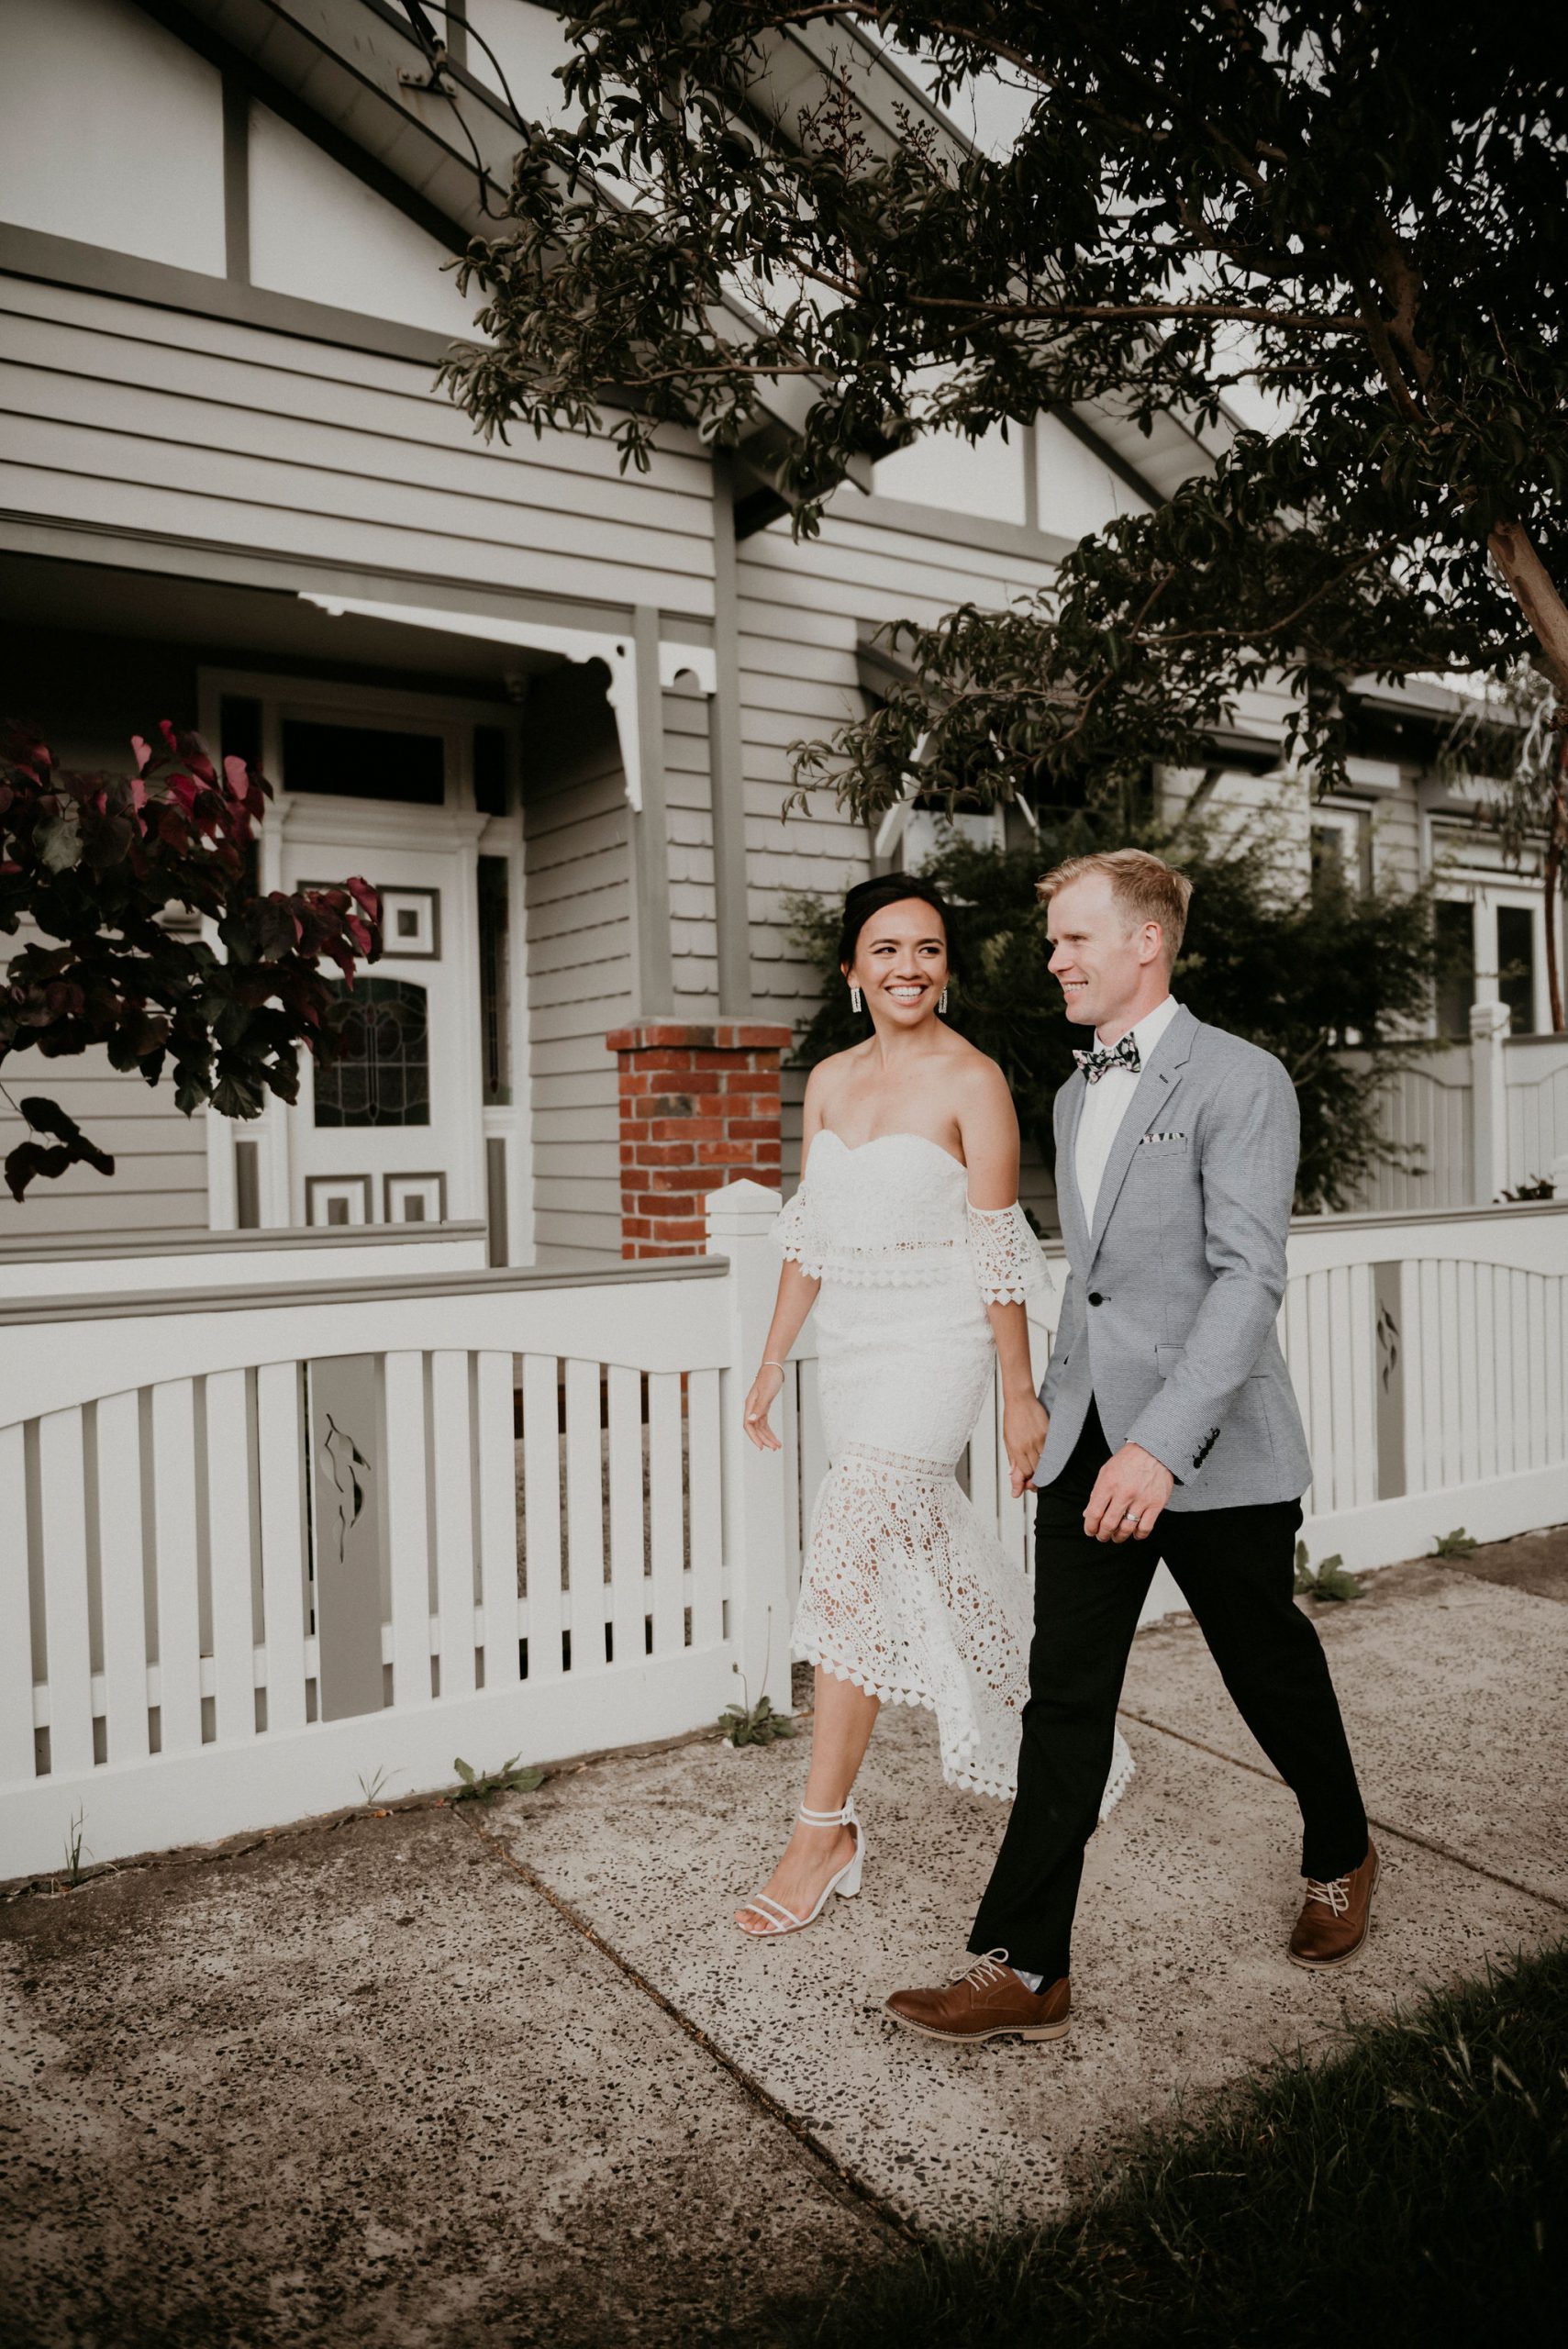 Lets-Elope-Melbourne-Celebrant-Photographer-Elopement-Package-Victoria-Sarah-Matler-Photography-Elope-at-Home-Footscray-weddings-intimate-21